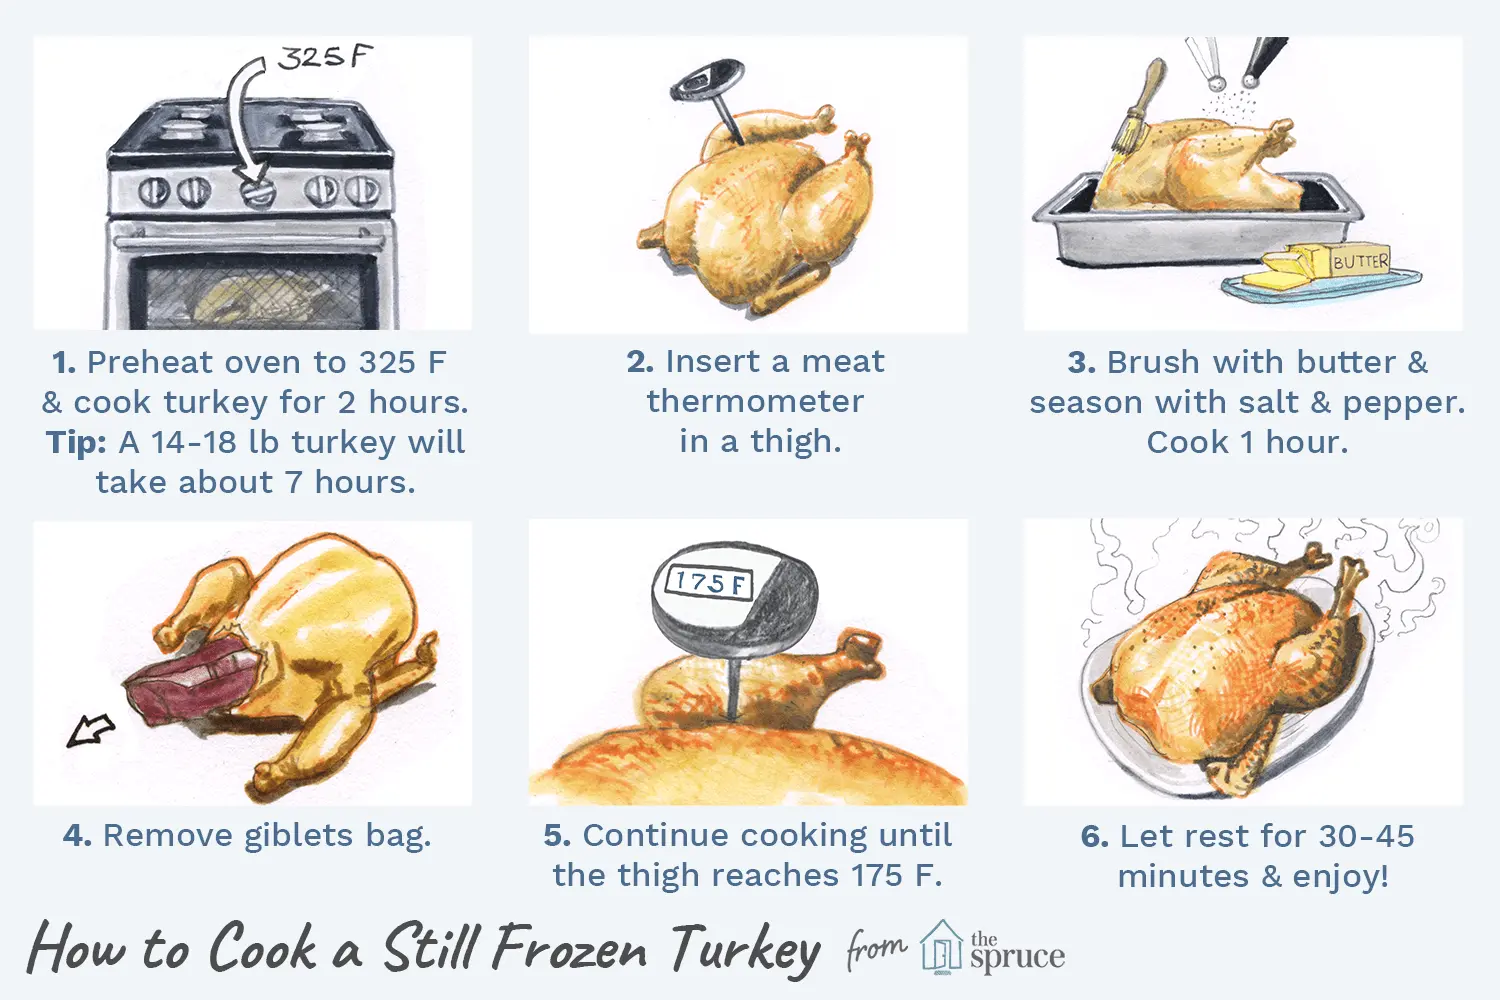 how to cook a frozen smoked turkey - What is the best way to cook a frozen turkey